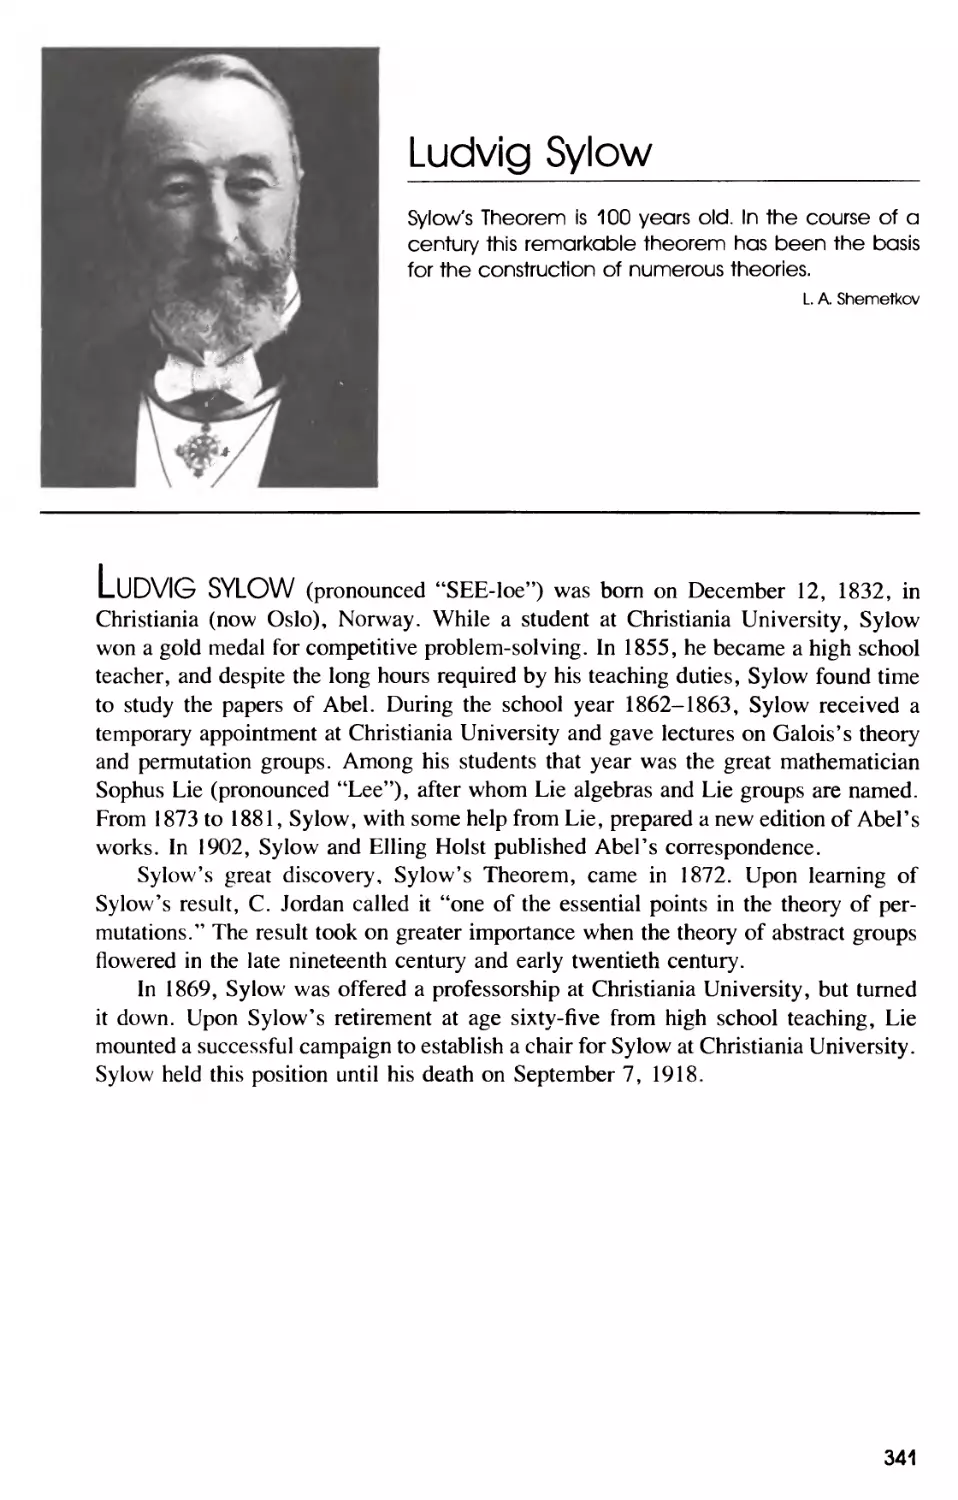 Biography of Ludvig Sylow